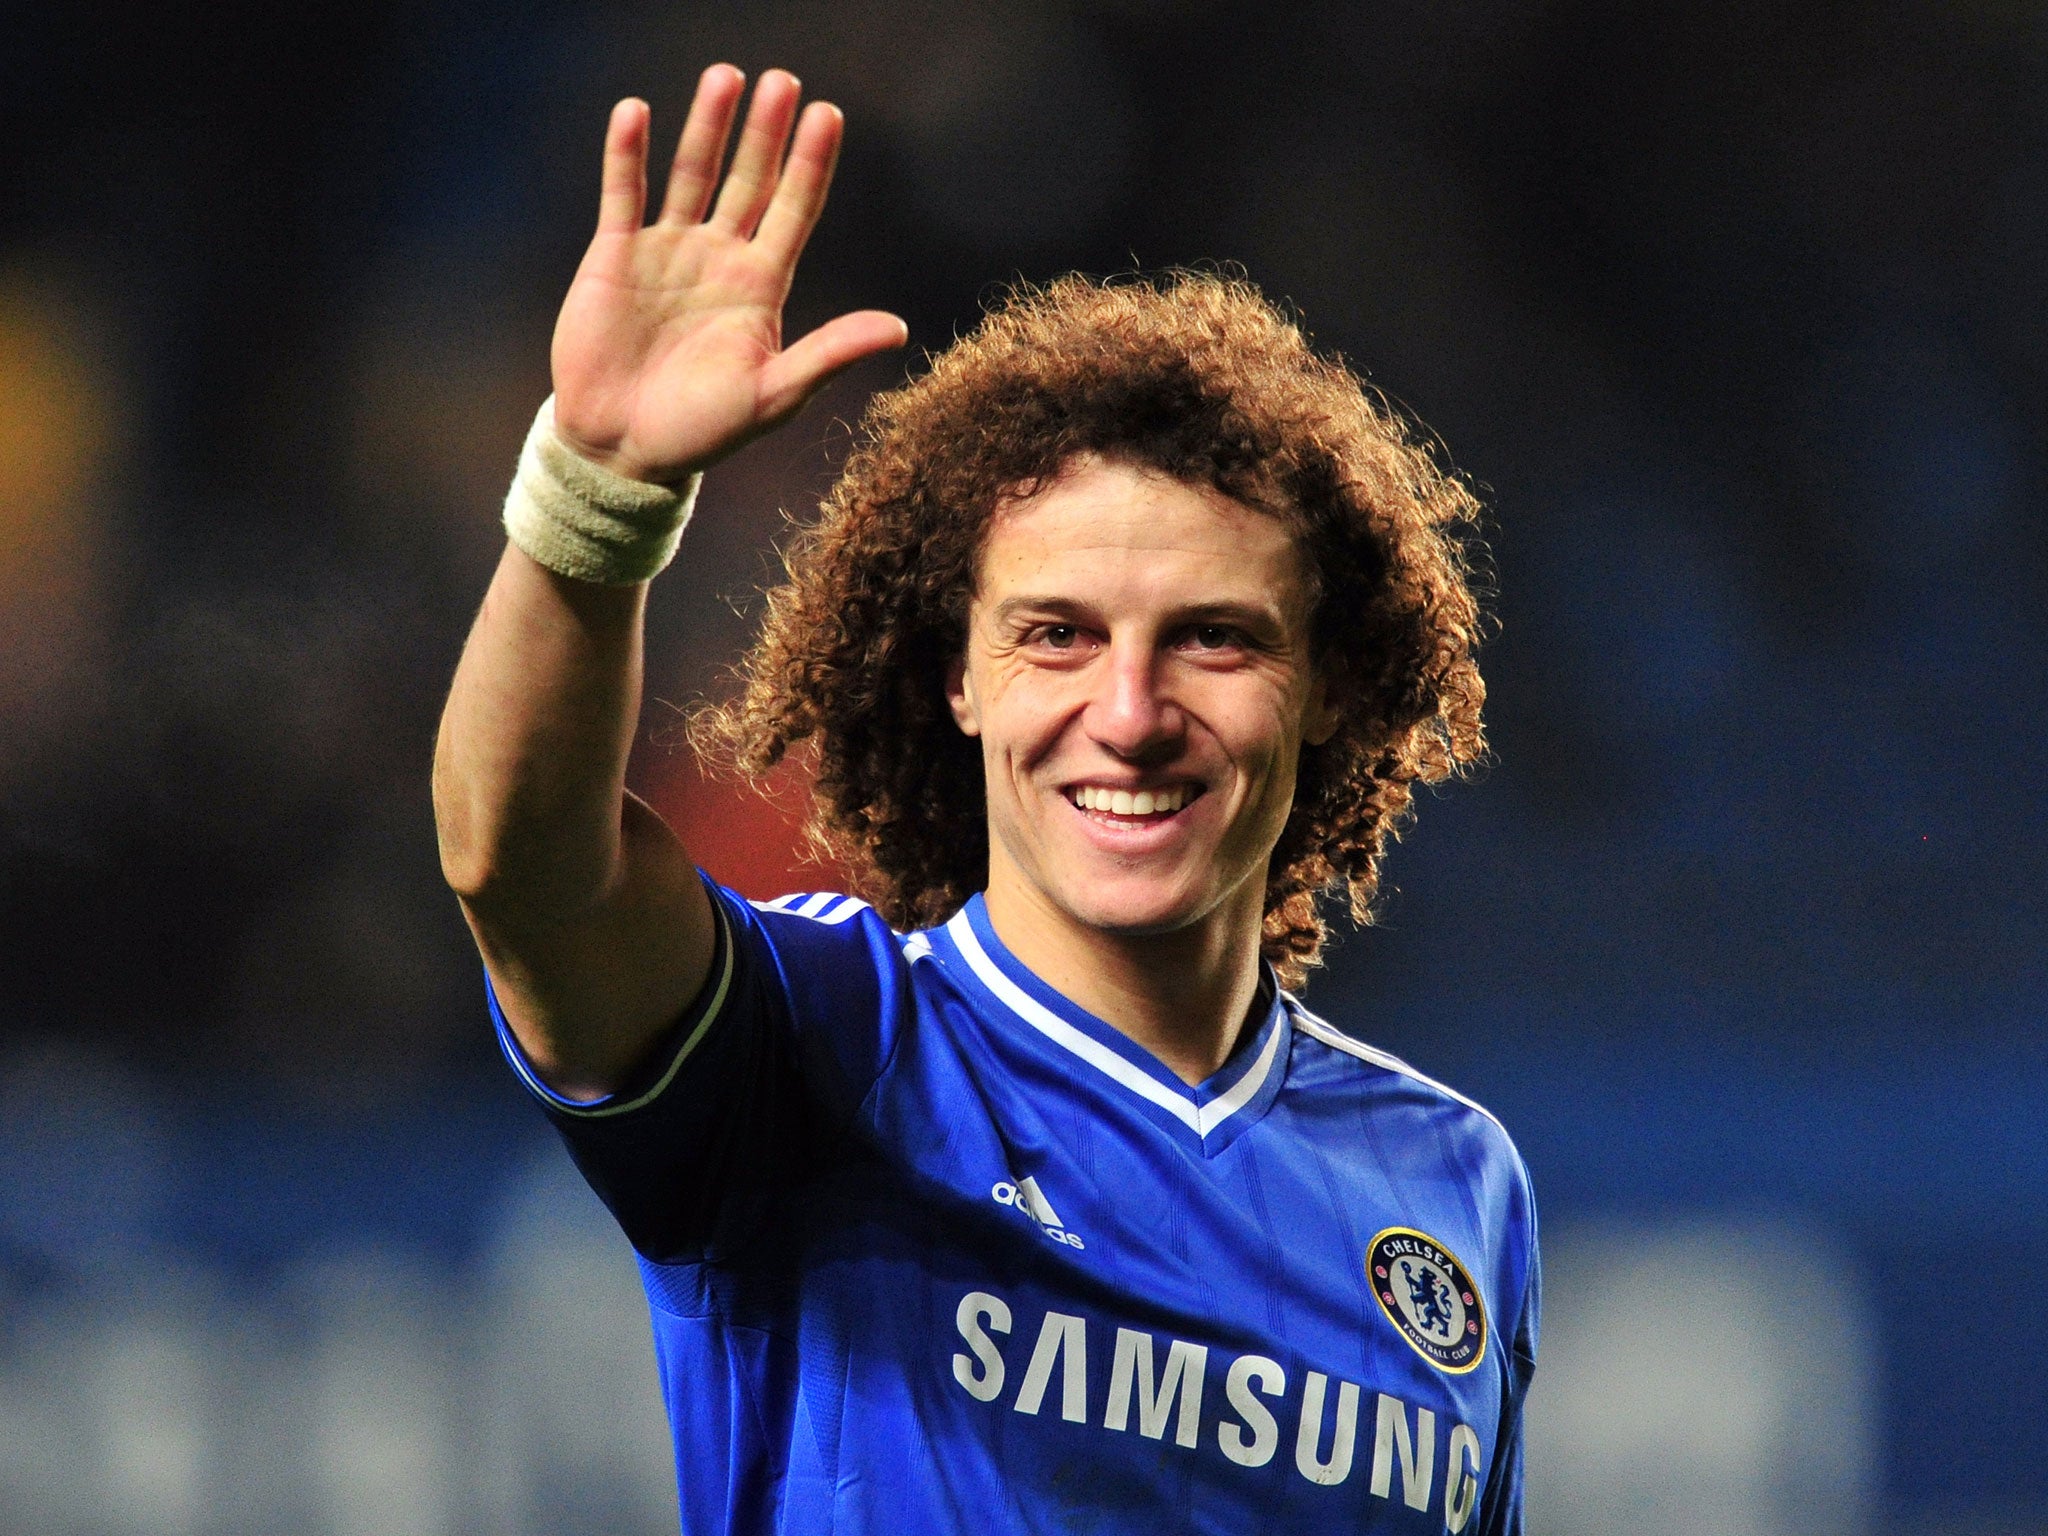 David Luiz has been linked with a move to Barcelona after he claimed to turn down a transfer in the summer